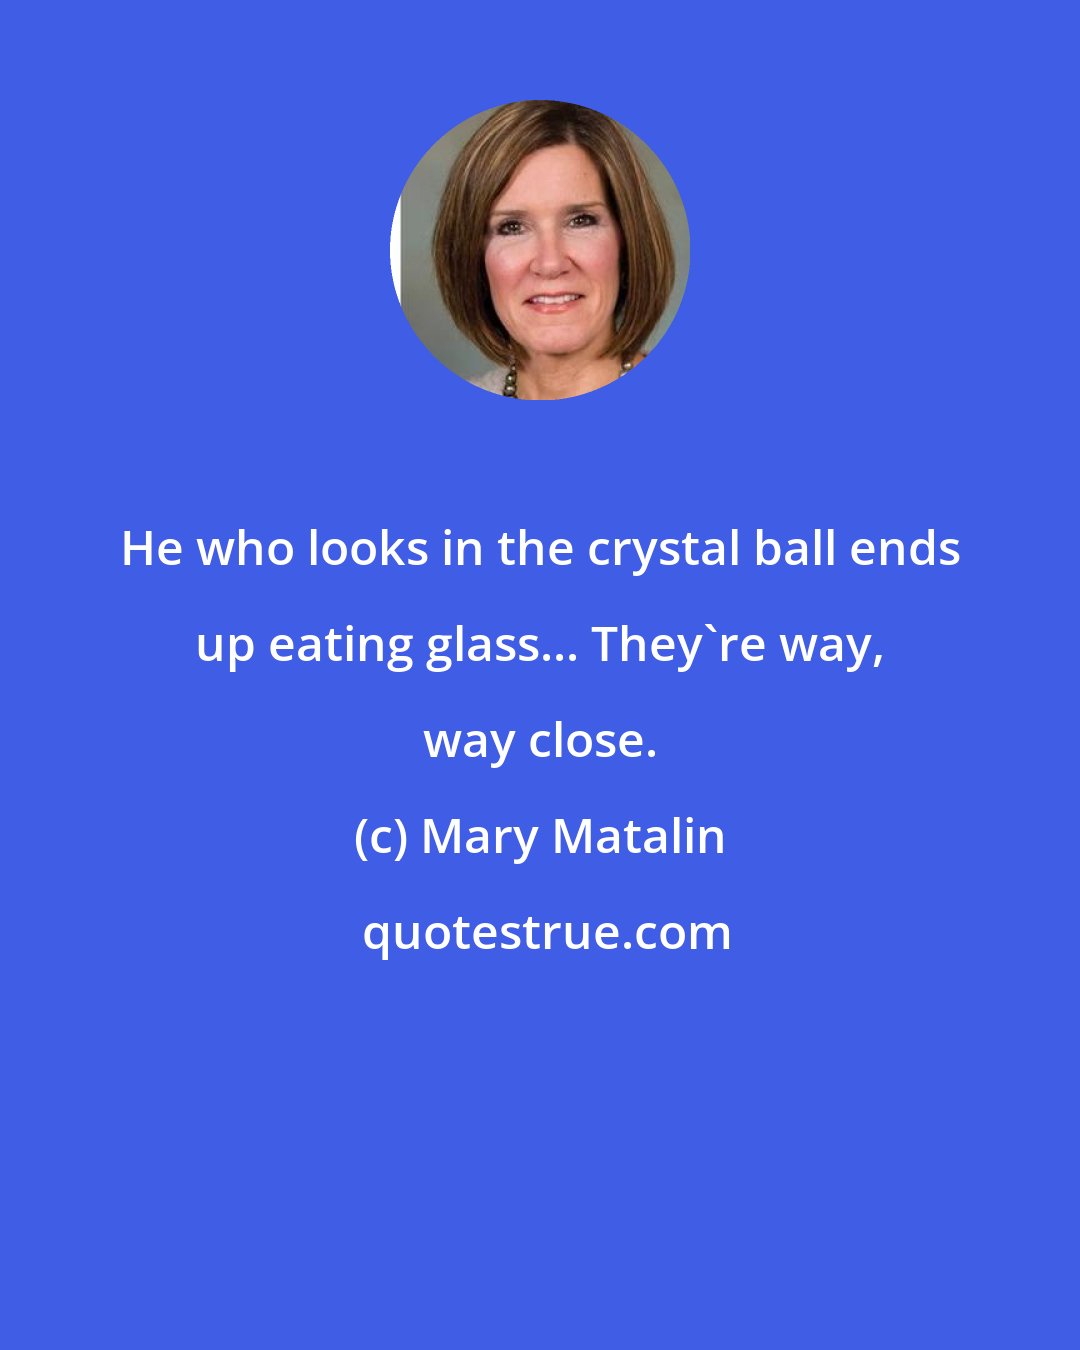 Mary Matalin: He who looks in the crystal ball ends up eating glass... They're way, way close.